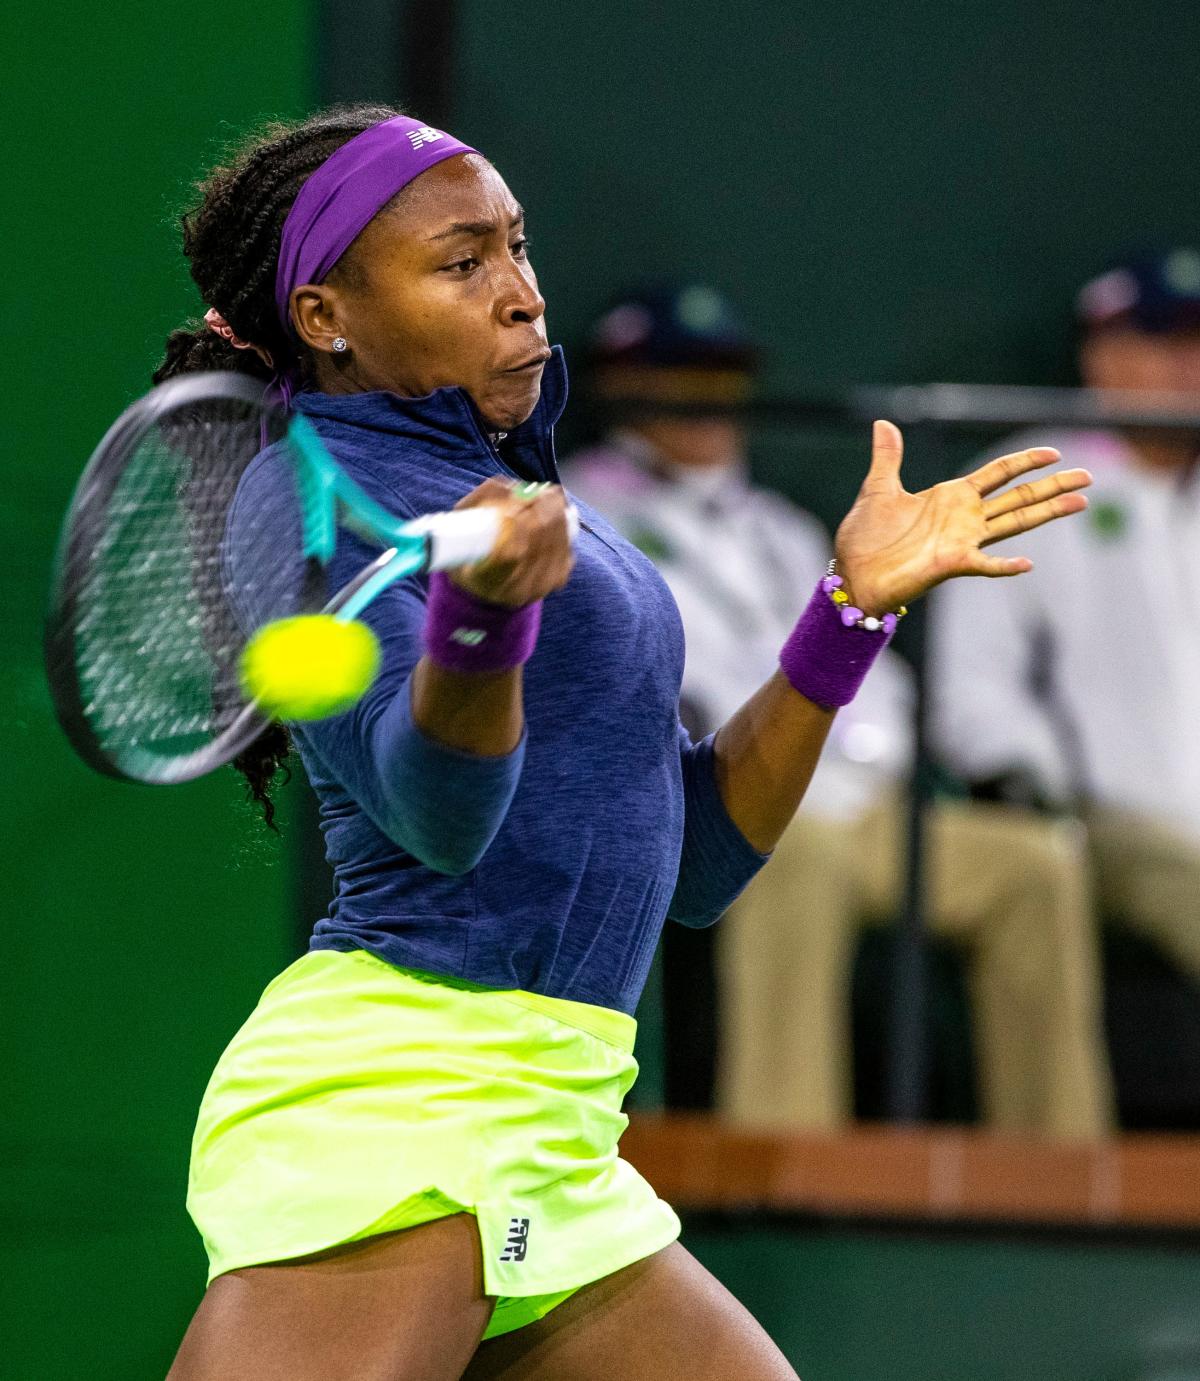 Get Venus Williams' Miami Open Style With This $27 Lookalike Top